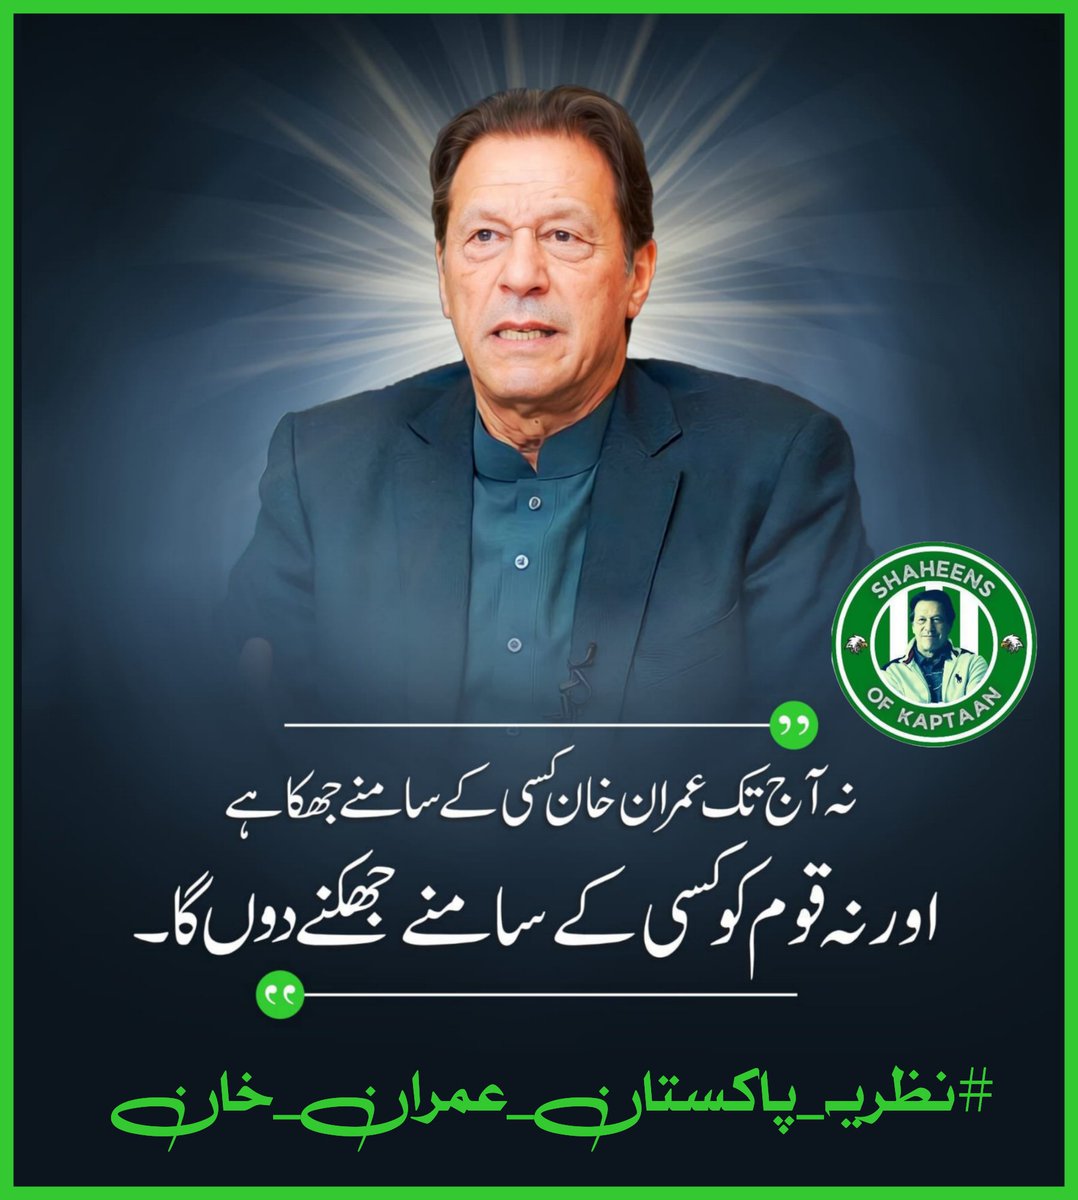 The youth of Pakistan see Imran Khan as a role model for integrity and hard work. #نظریہ_پاکستان_عمران_خان @TeamS0K